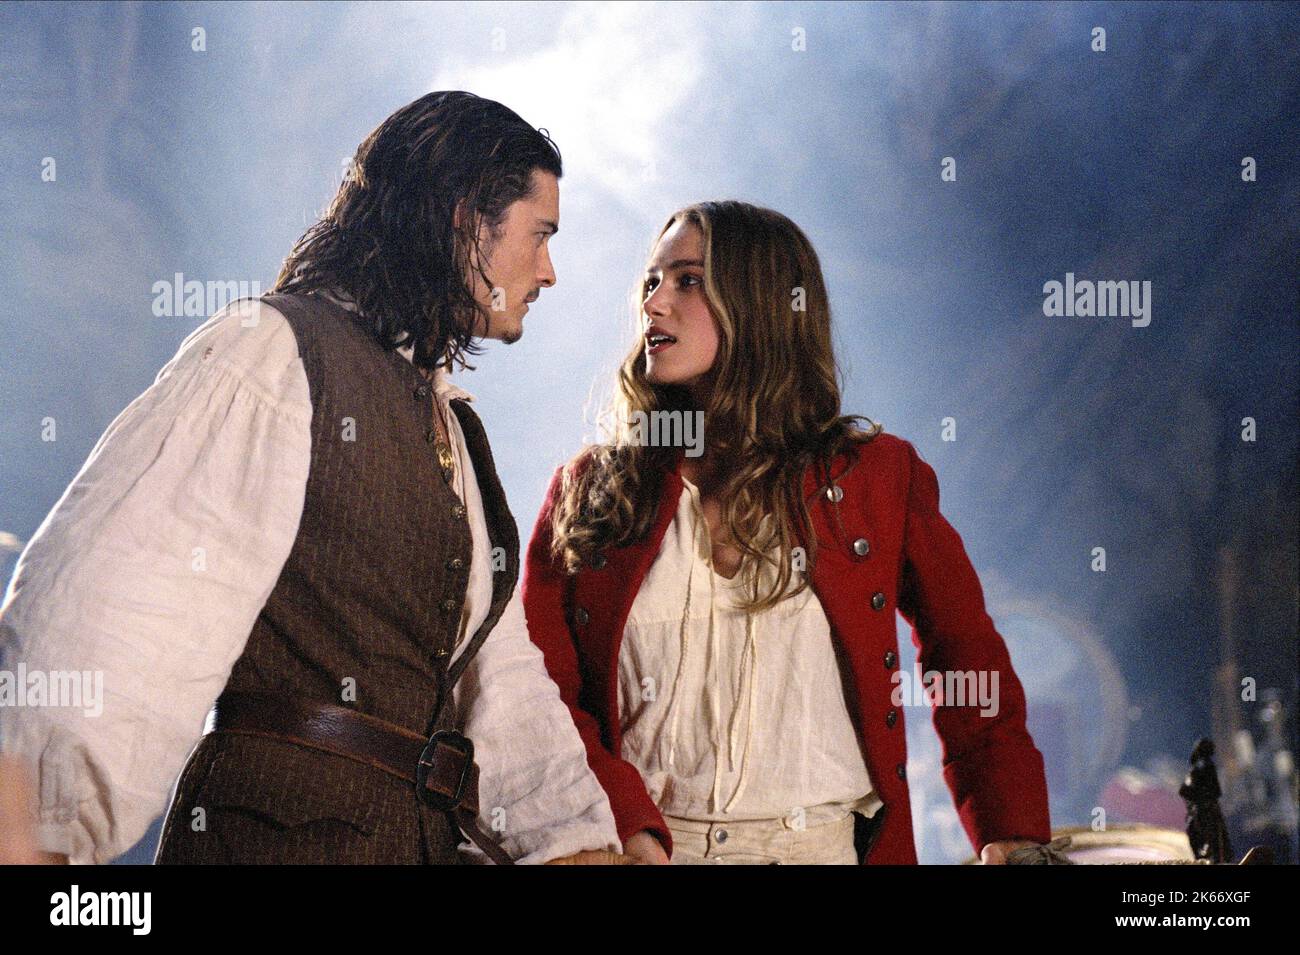 BLOOM,KNIGHTLEY, PIRATES OF THE CARIBBEAN: THE CURSE OF THE BLACK PEARL, 2003 Stock Photo